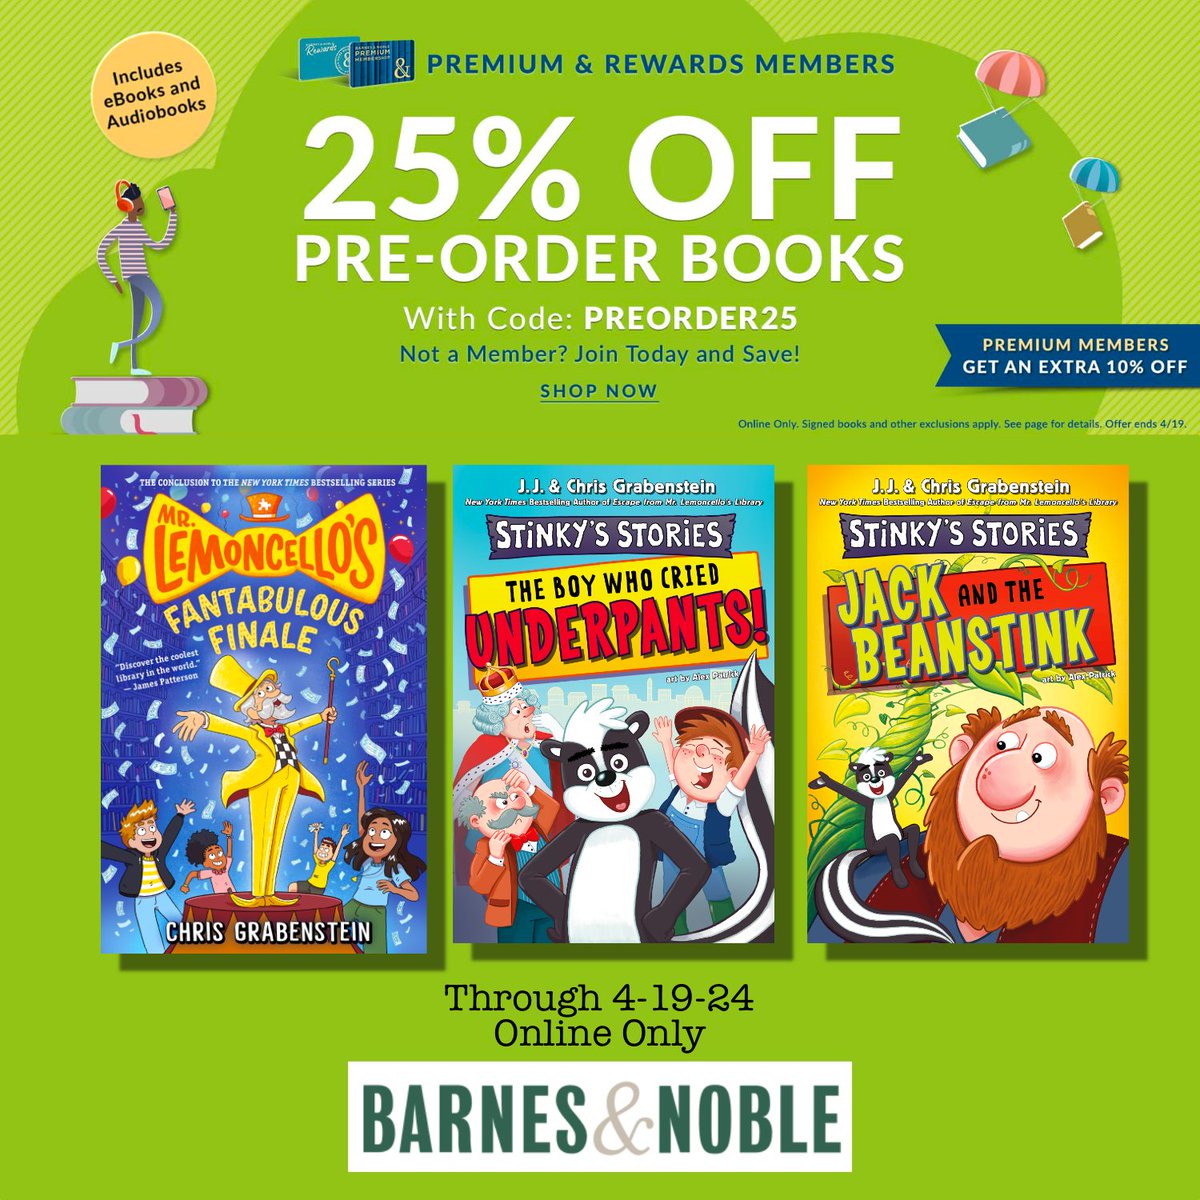 It's that time again. Now through Friday 4-19 only: Get 25% off when you order these upcoming Grabenstein titles online from B&N. Use code PREORDER25 at checkout. @barnesandnoble @randomhousekids @harperkids